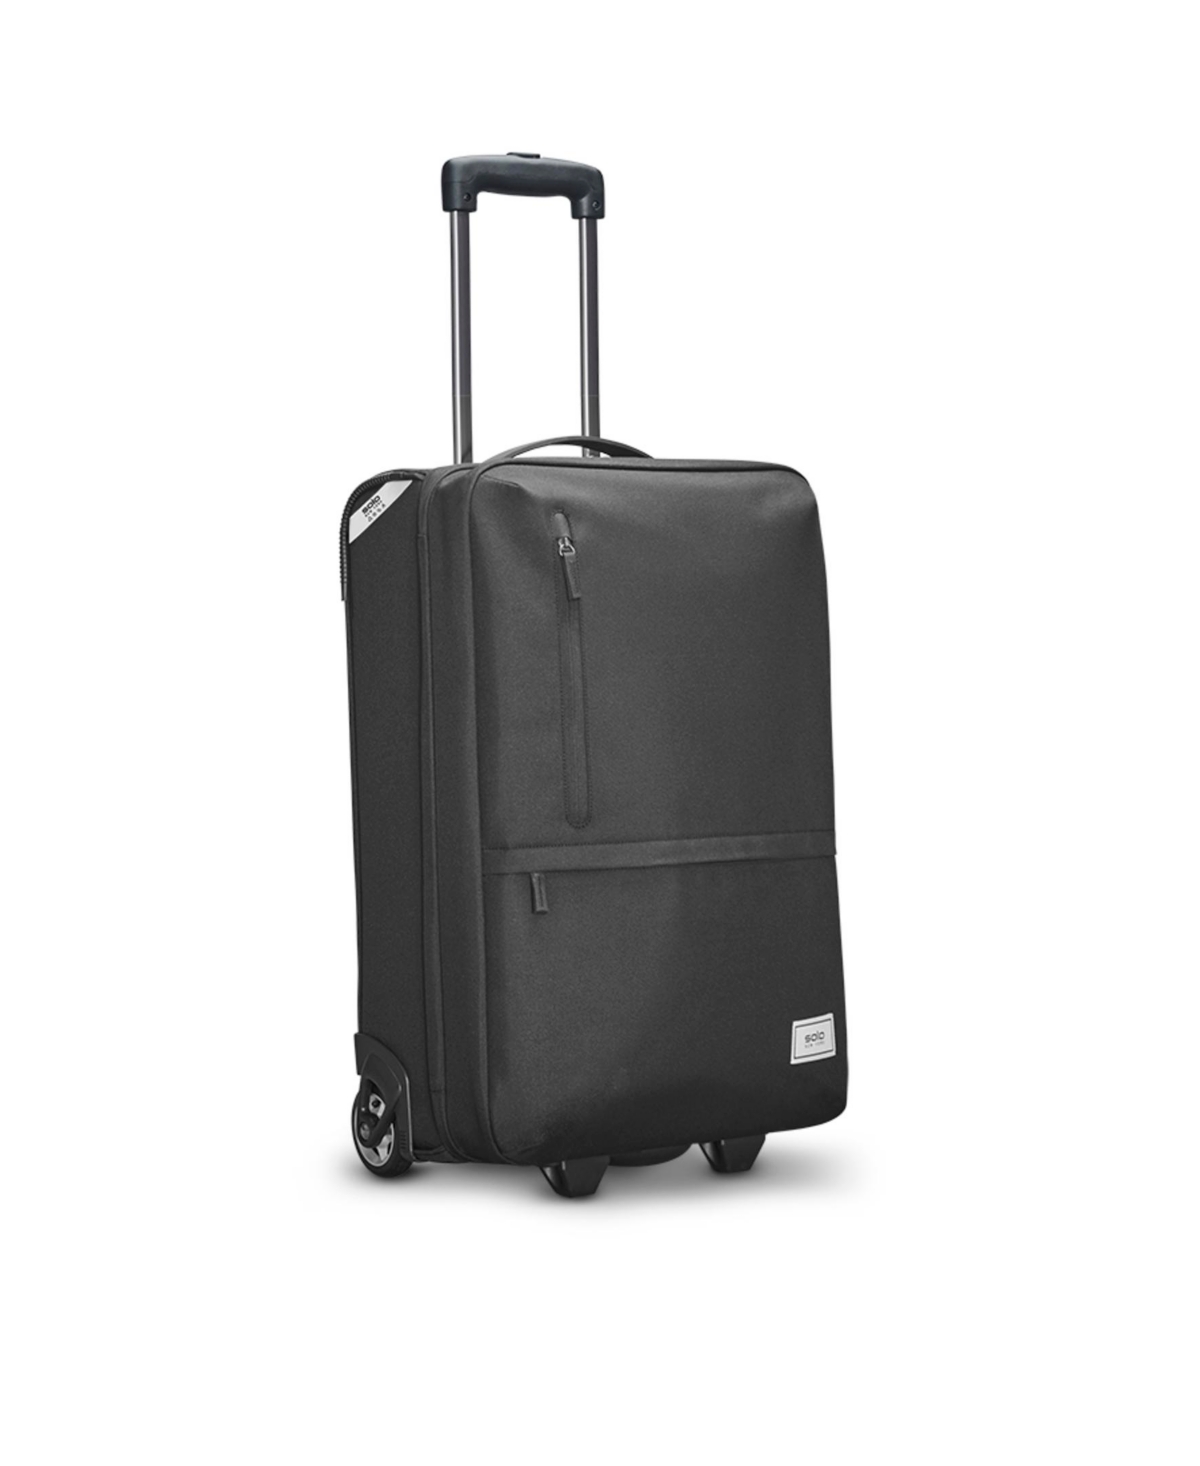 Solo New York Re-treat Carry-on In Black